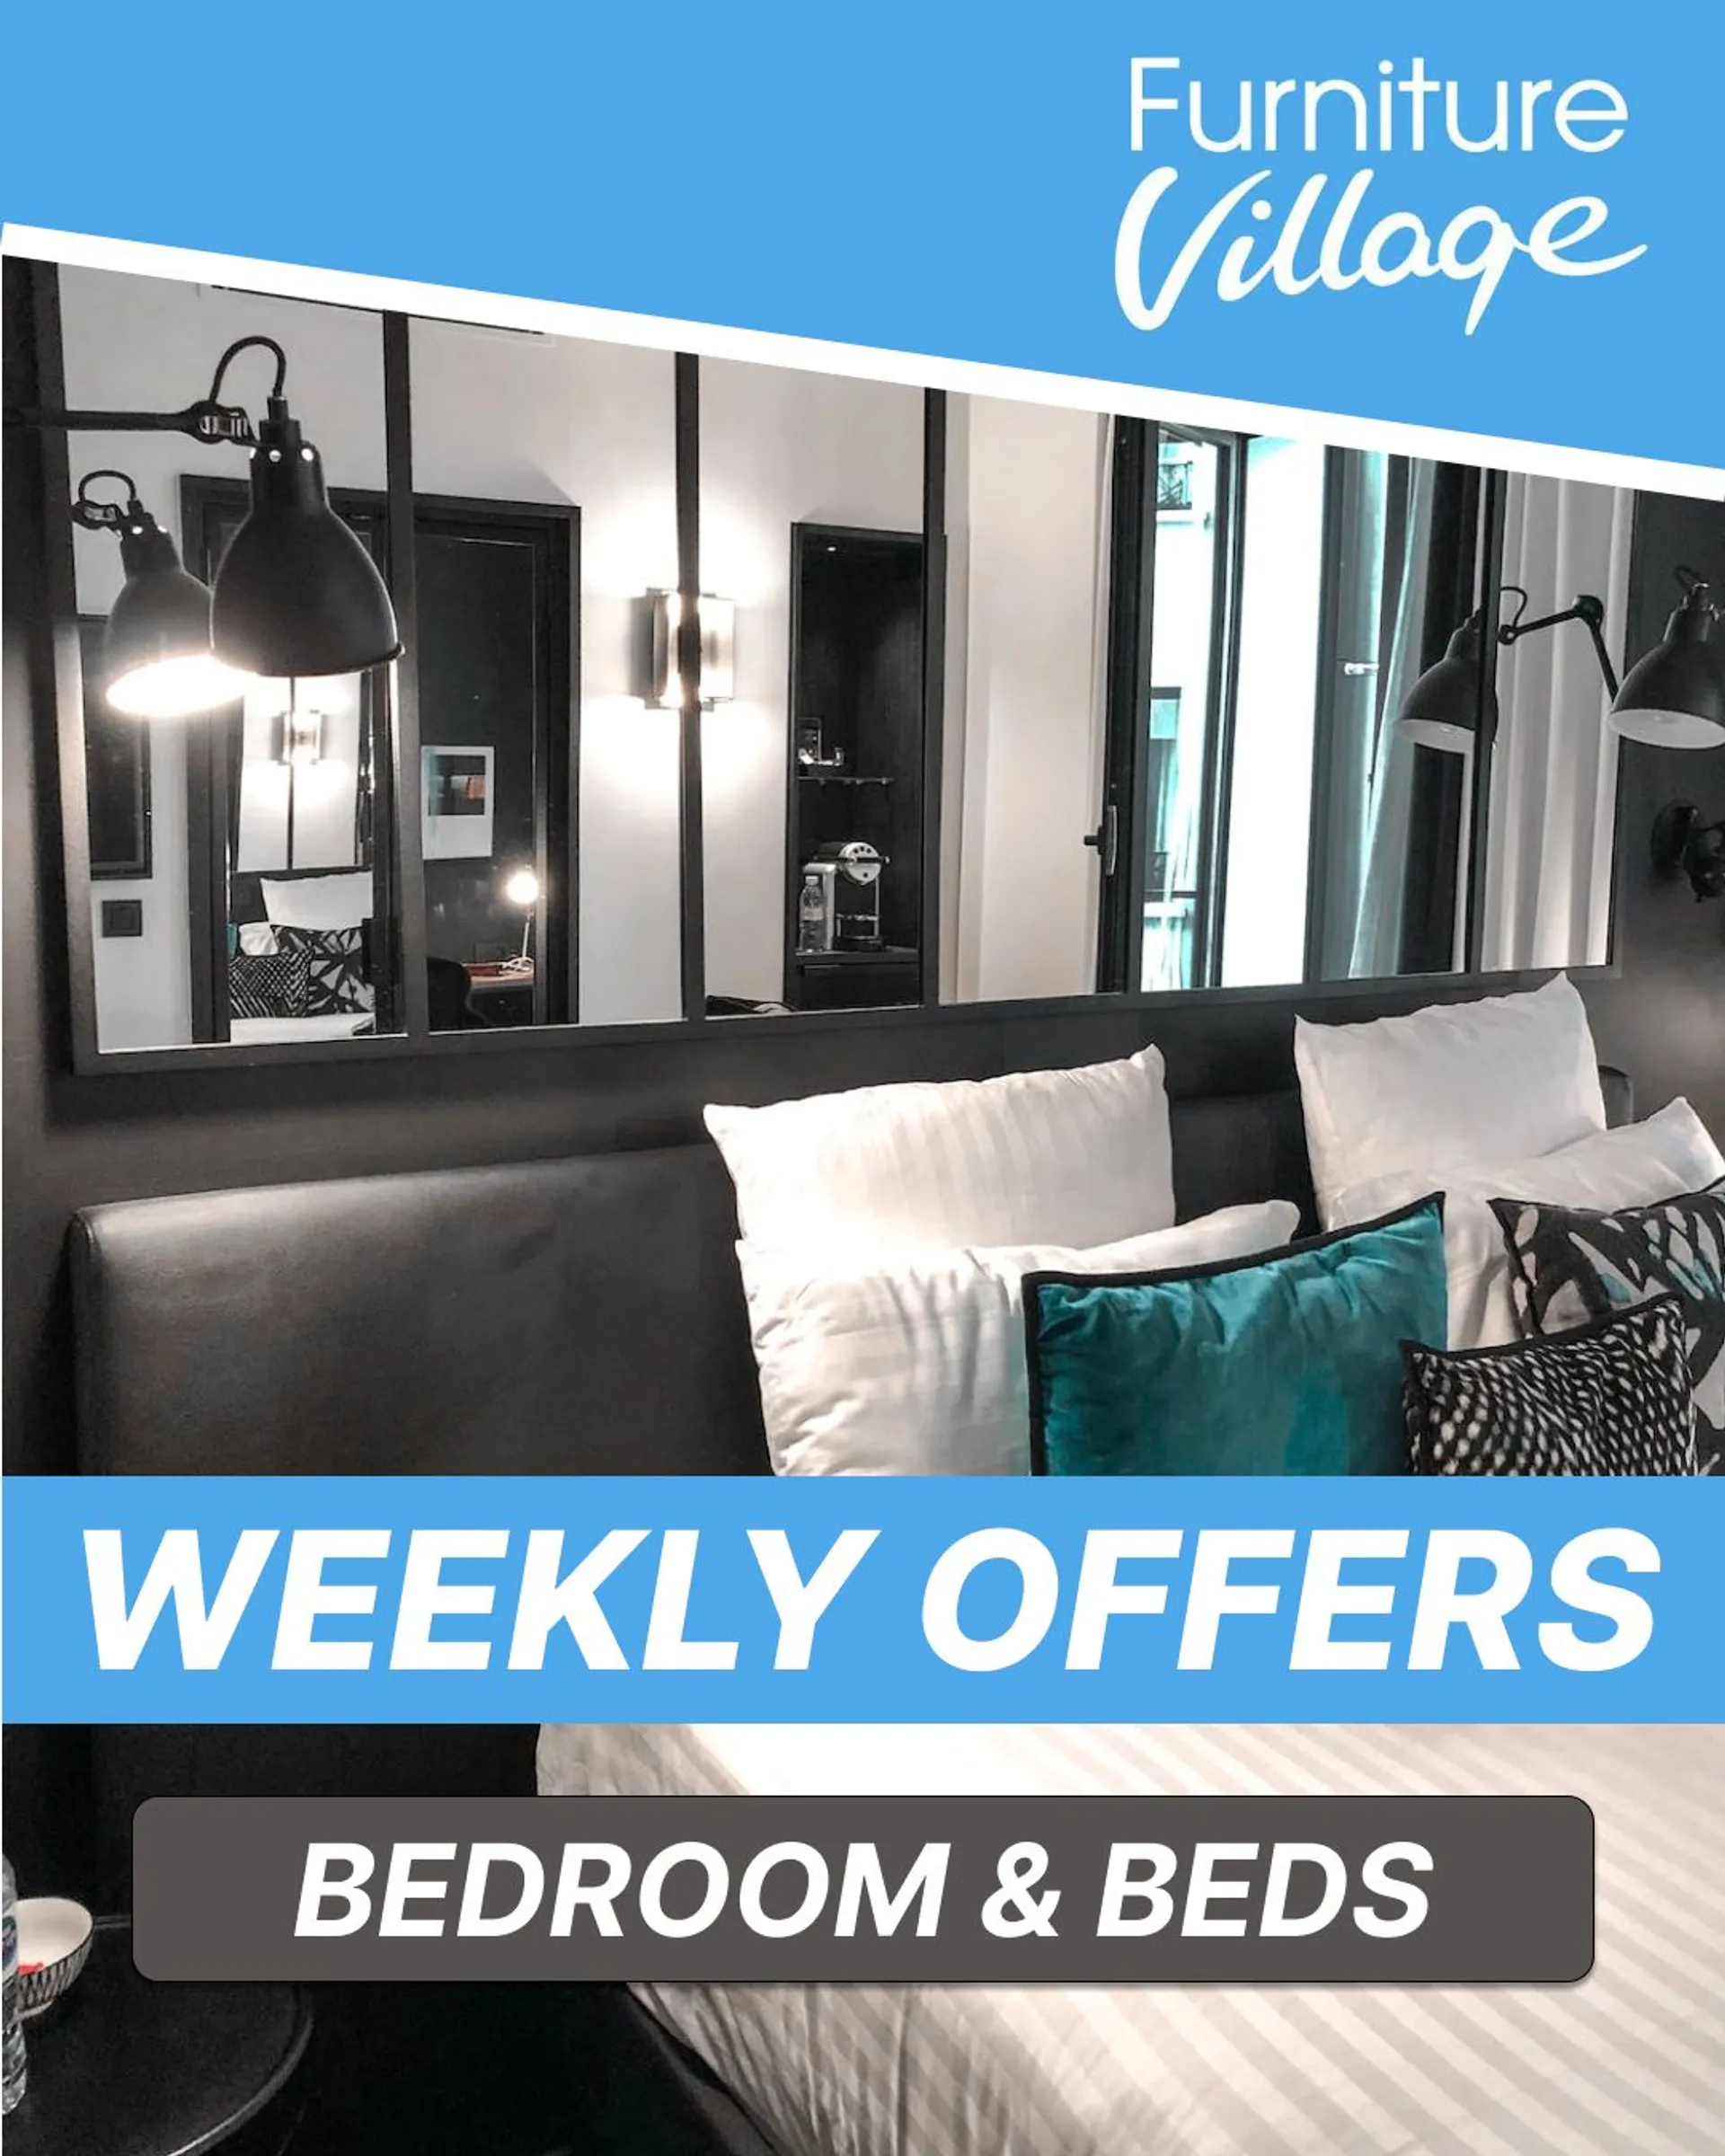 Furniture Village - Beds & Bedroom offers from 23 February to 28 February 2024 - Catalogue Page 